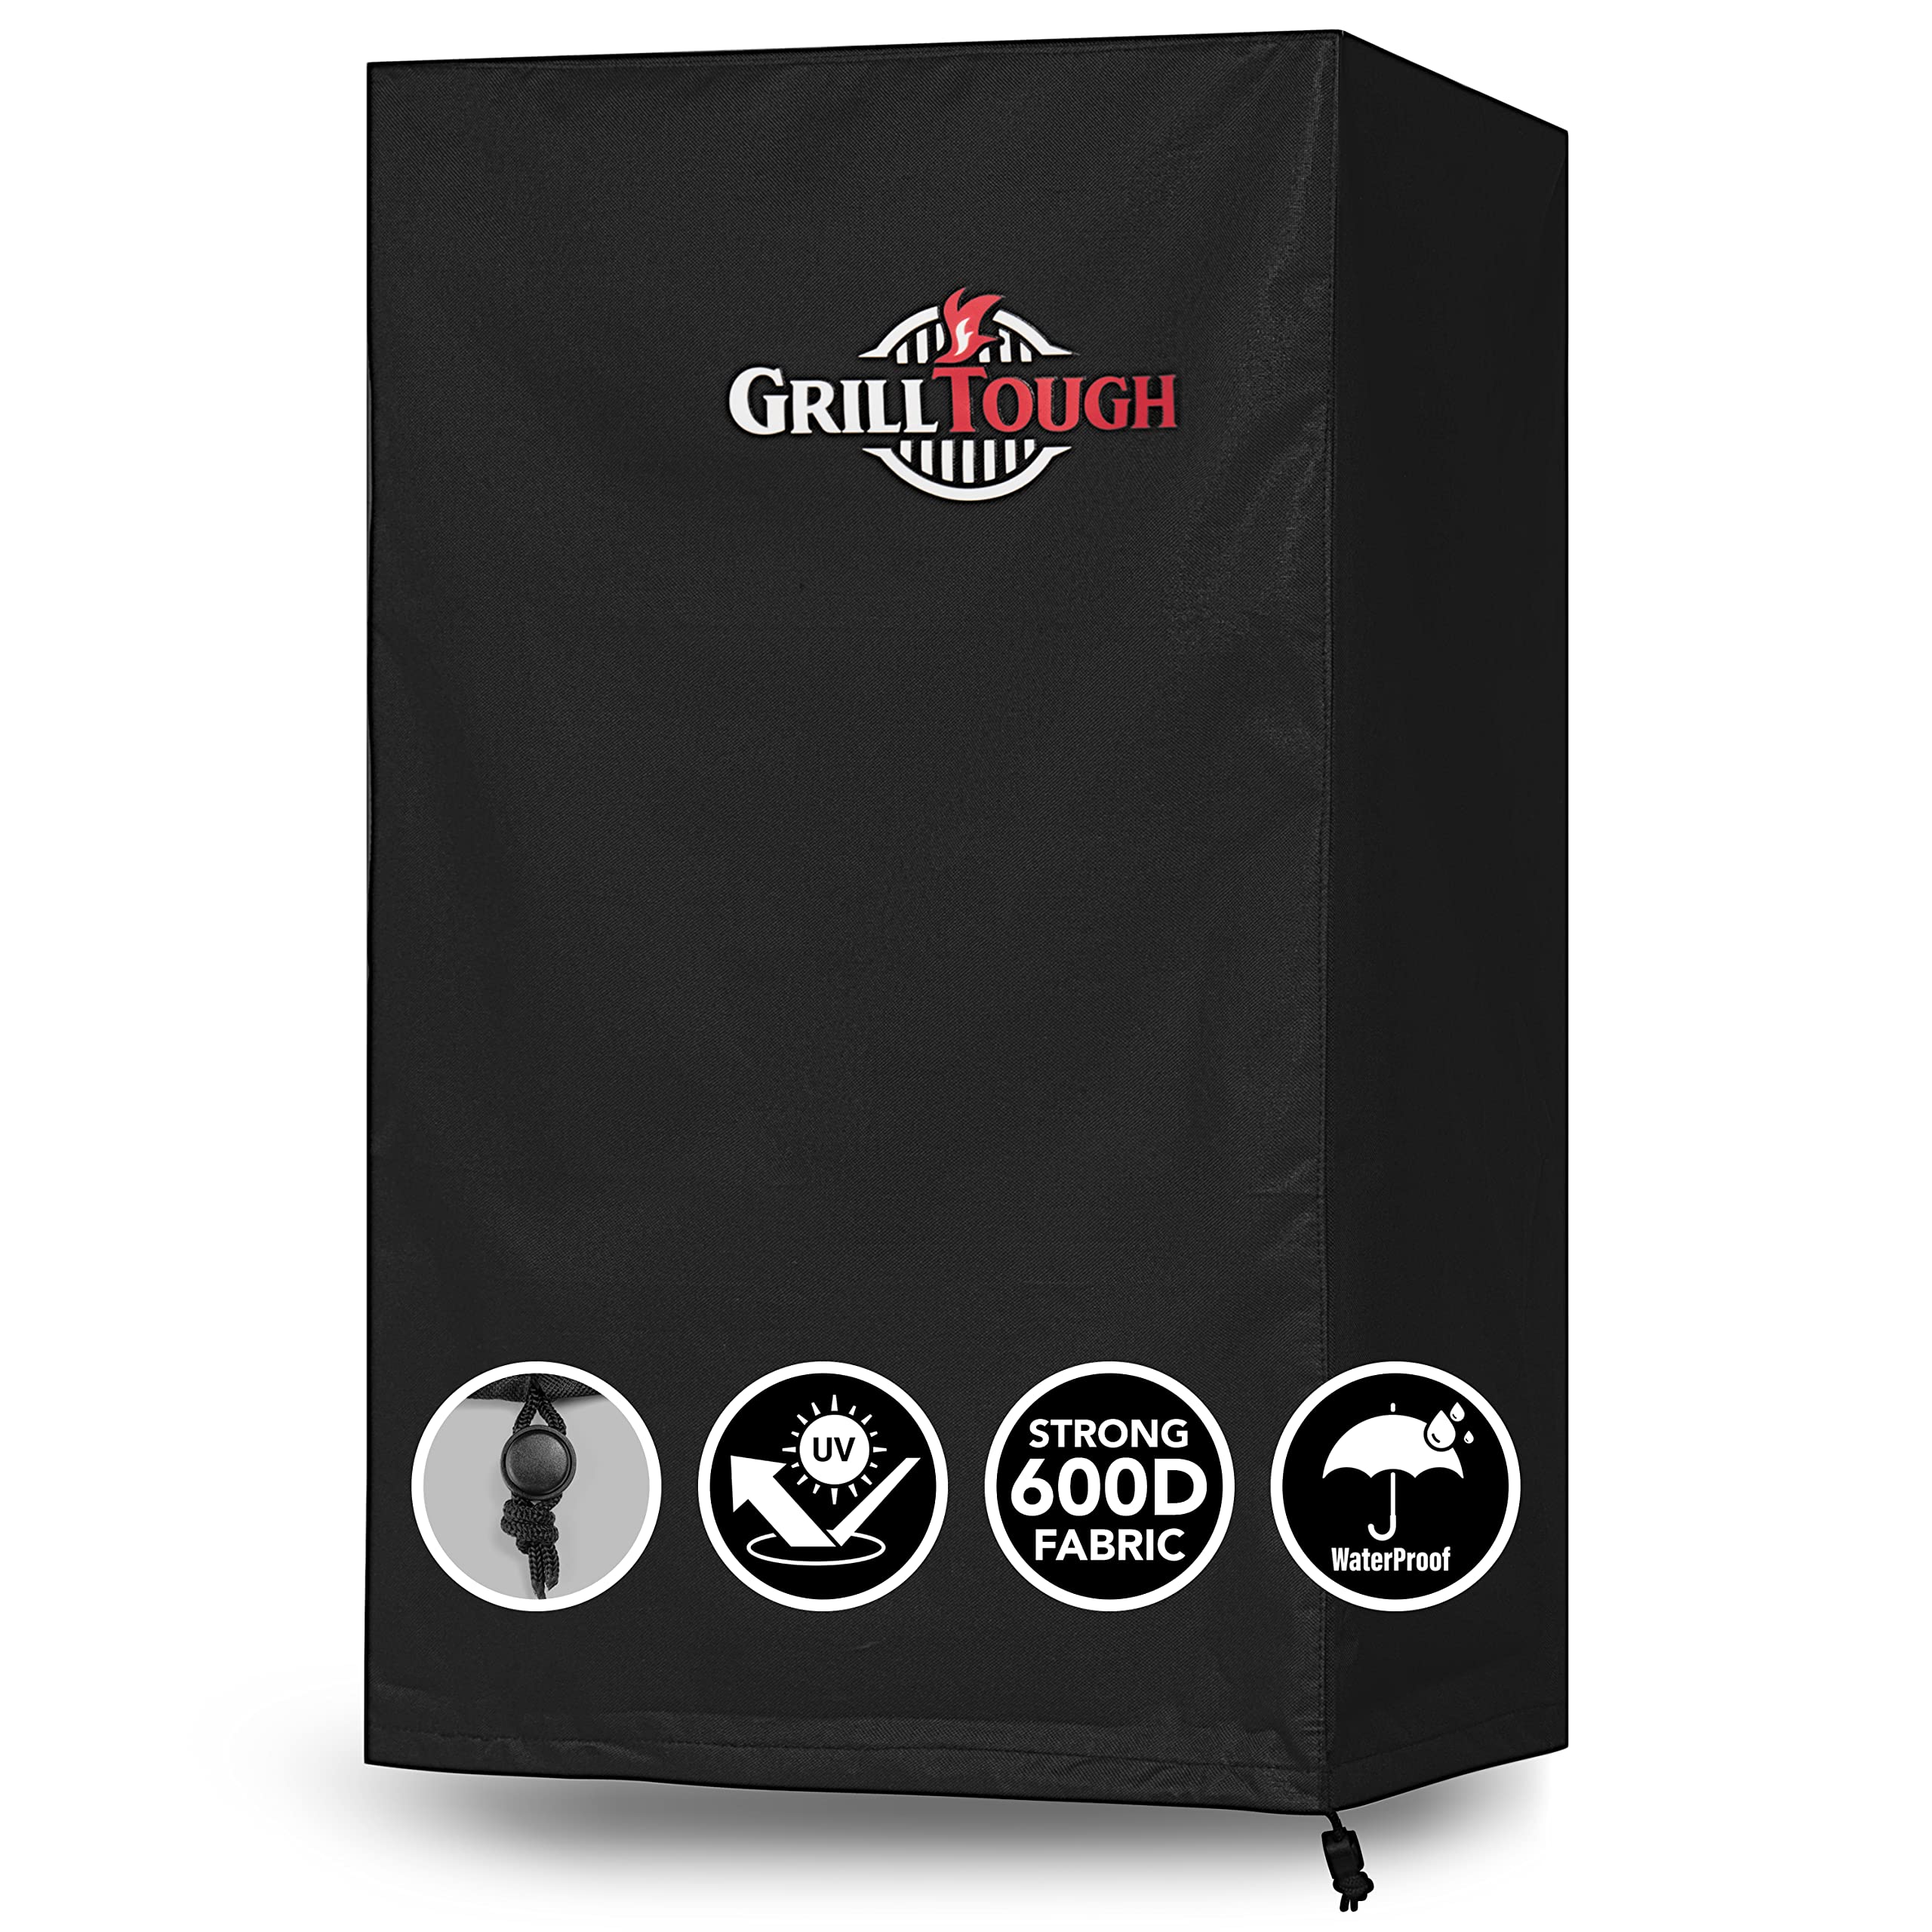 GrillTough Heavy Duty BBQ Grill Cover for Outdoor Grill – Waterproof, Weather Resistant, UV & Fade Resistant with Adjustable Straps – Gas Grill Cover for Weber, Genesis, Charbroil, etc.  - Very Good